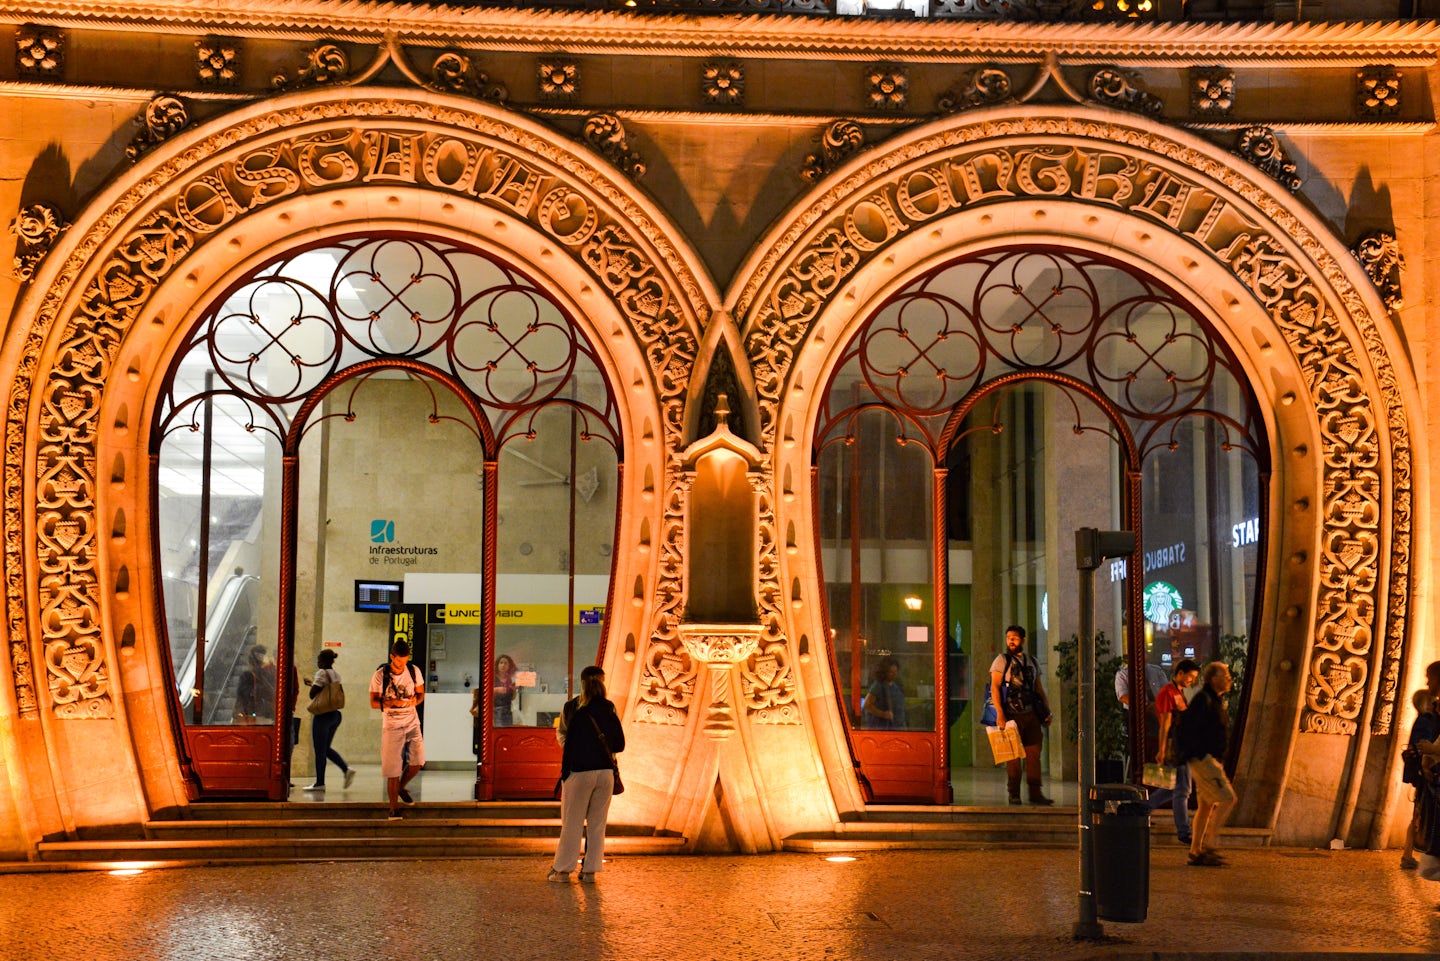 Lisbon's gorgeous Rossio train station entrance bathed in the warm glow.